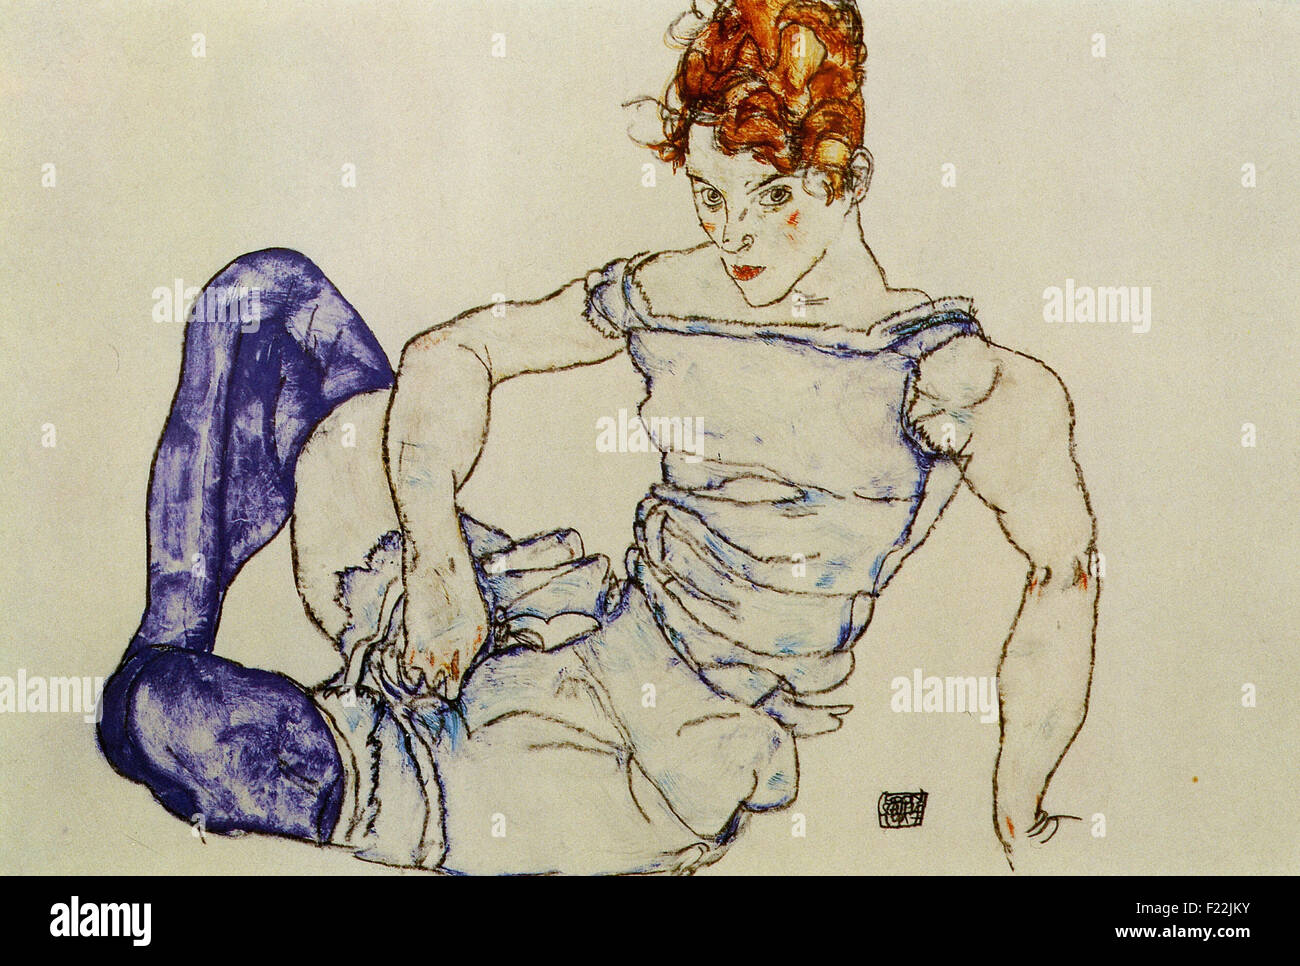 Egon Schiele - Seated Woman in Violet Stockings Stock Photo